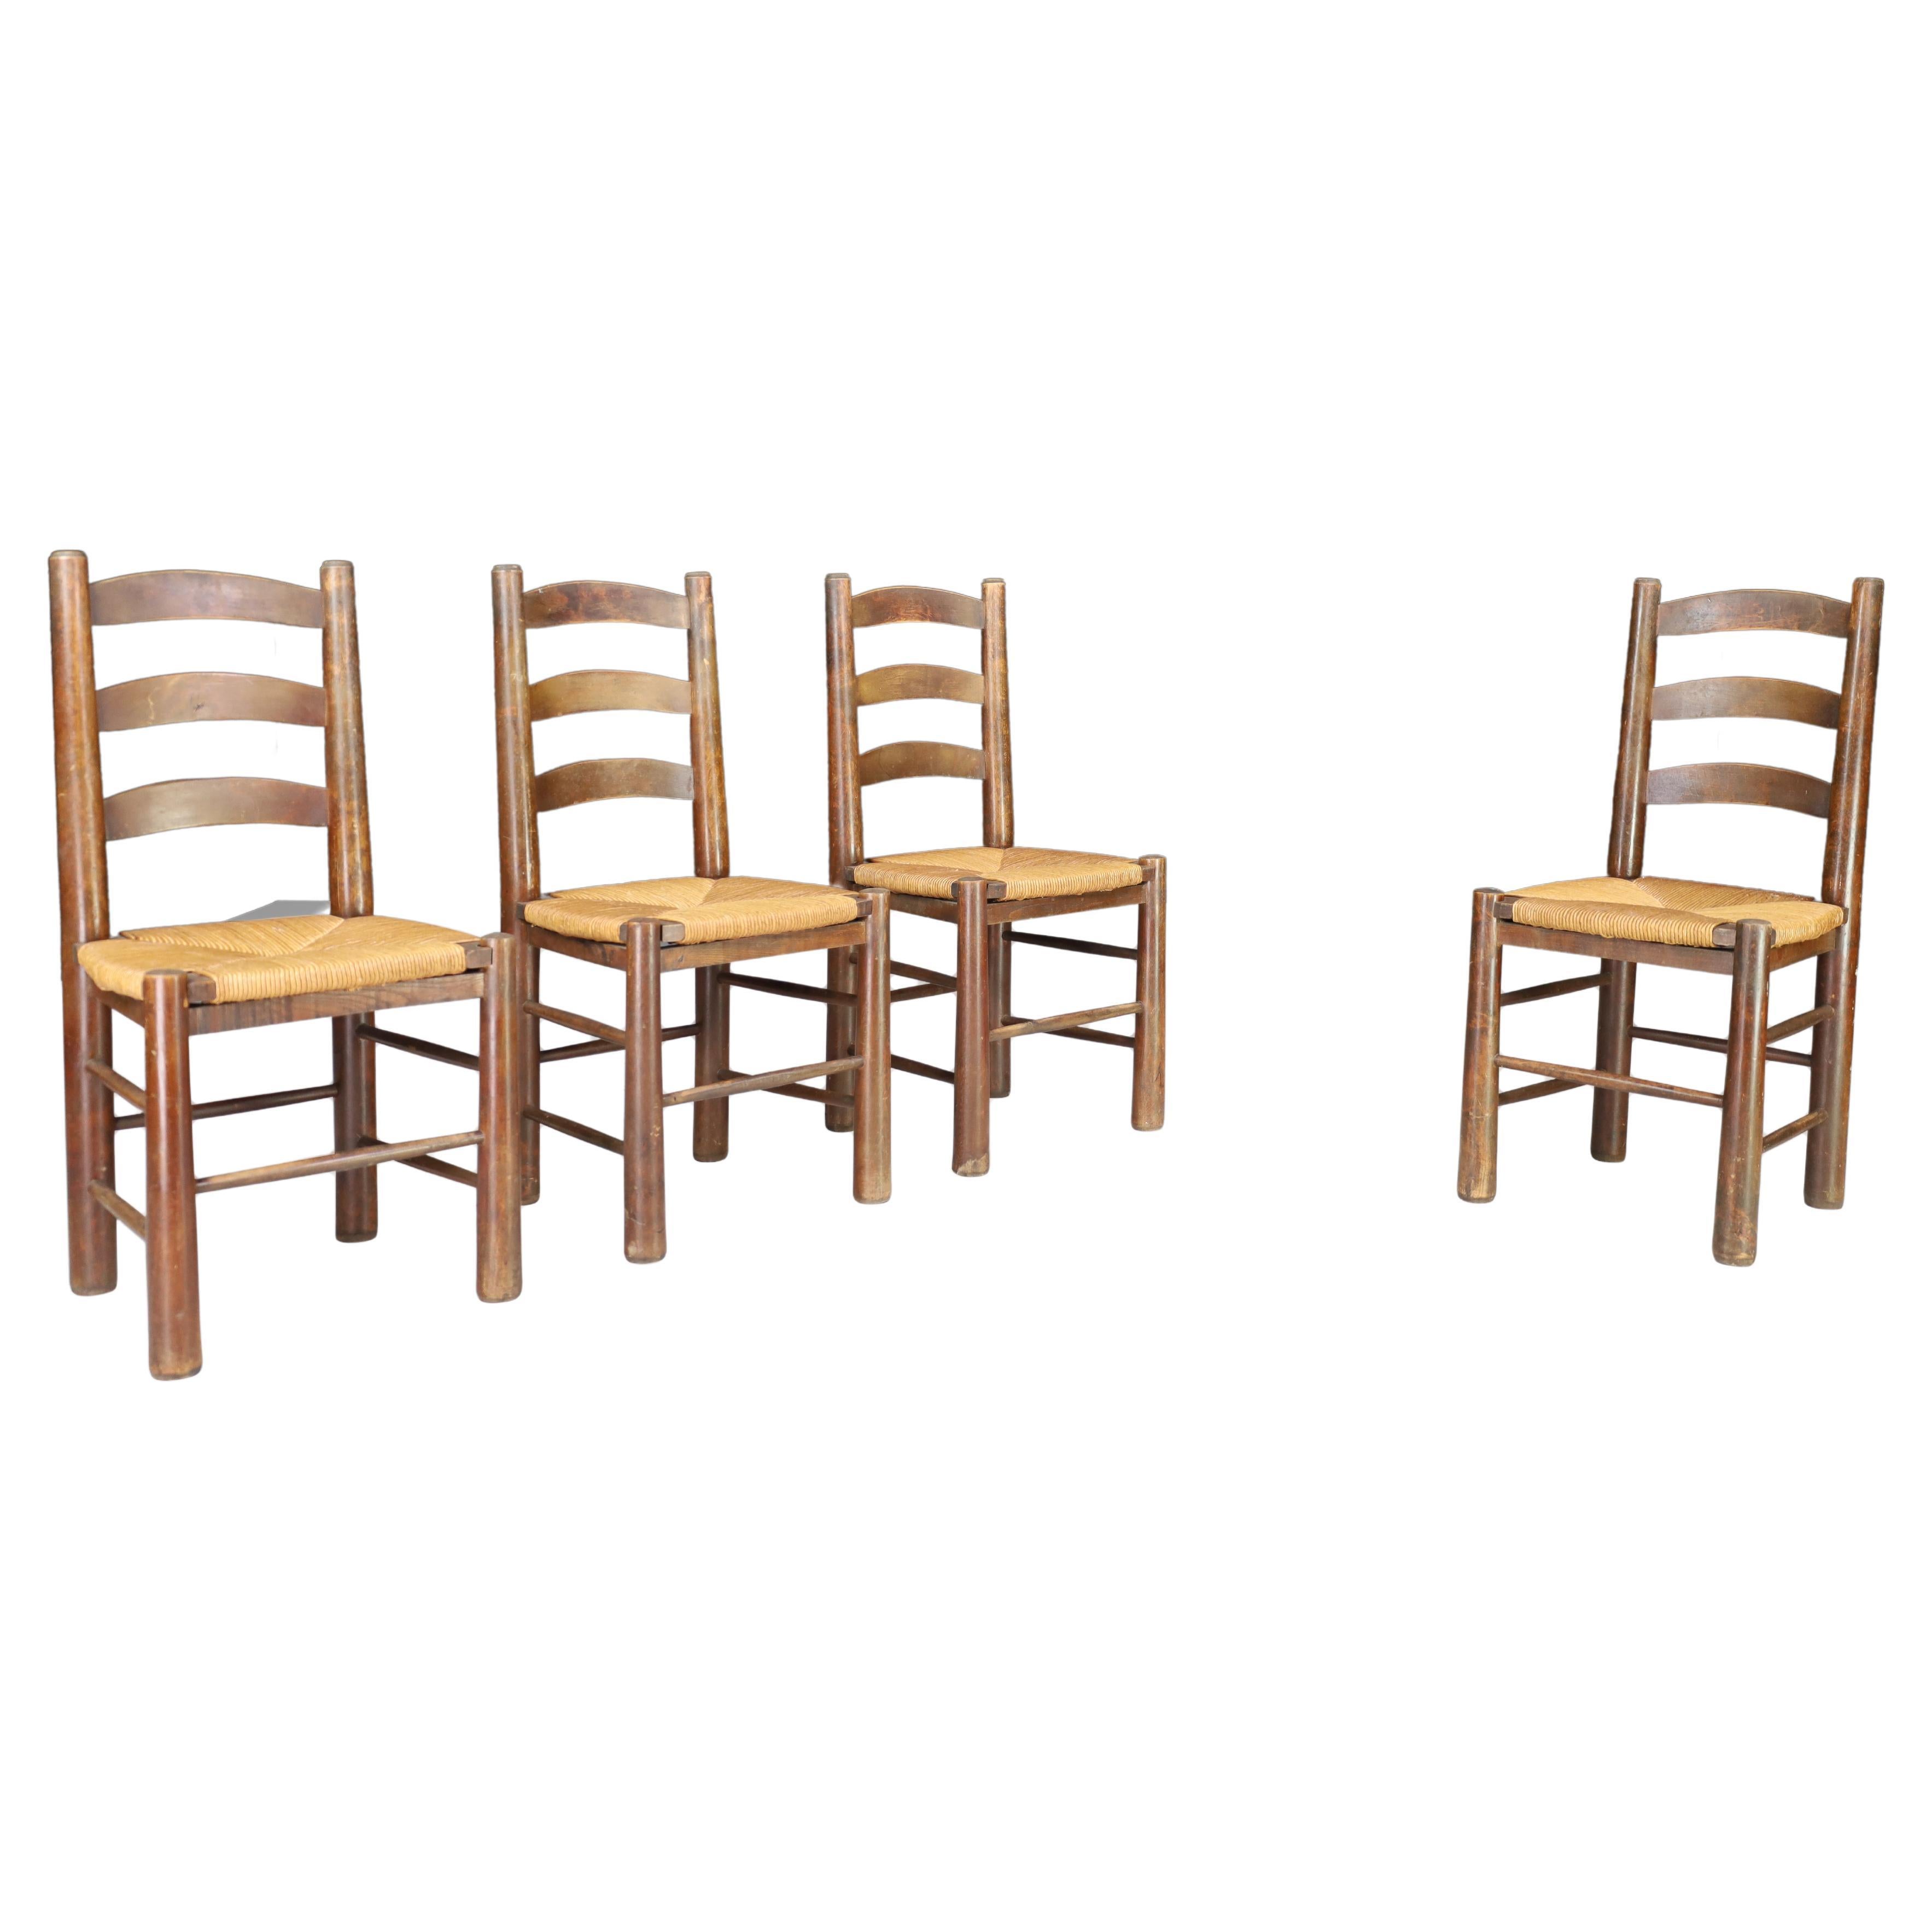 Georges Robert Dining Chairs in Oak and Rush, France, 1950s For Sale